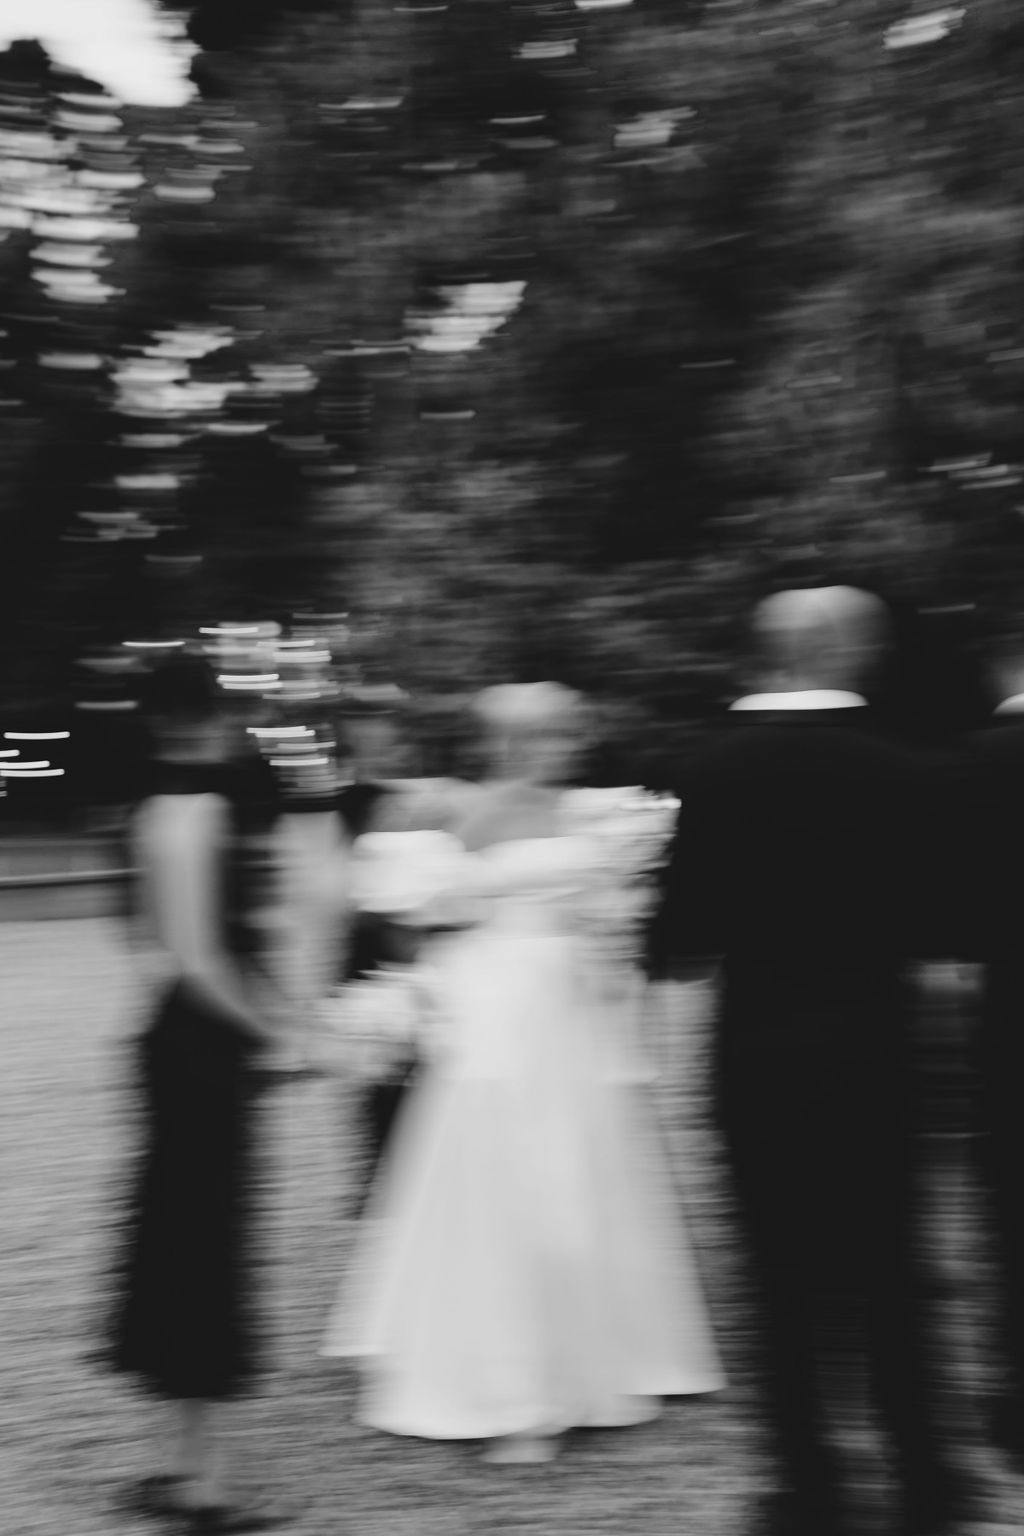 A blurry, black-and-white photo capturing a group of people dressed formally. They appear to be outdoors, possibly in a garden or park, engaged in conversation. The central figure seems to be wearing a white dress, suggesting a wedding scene.